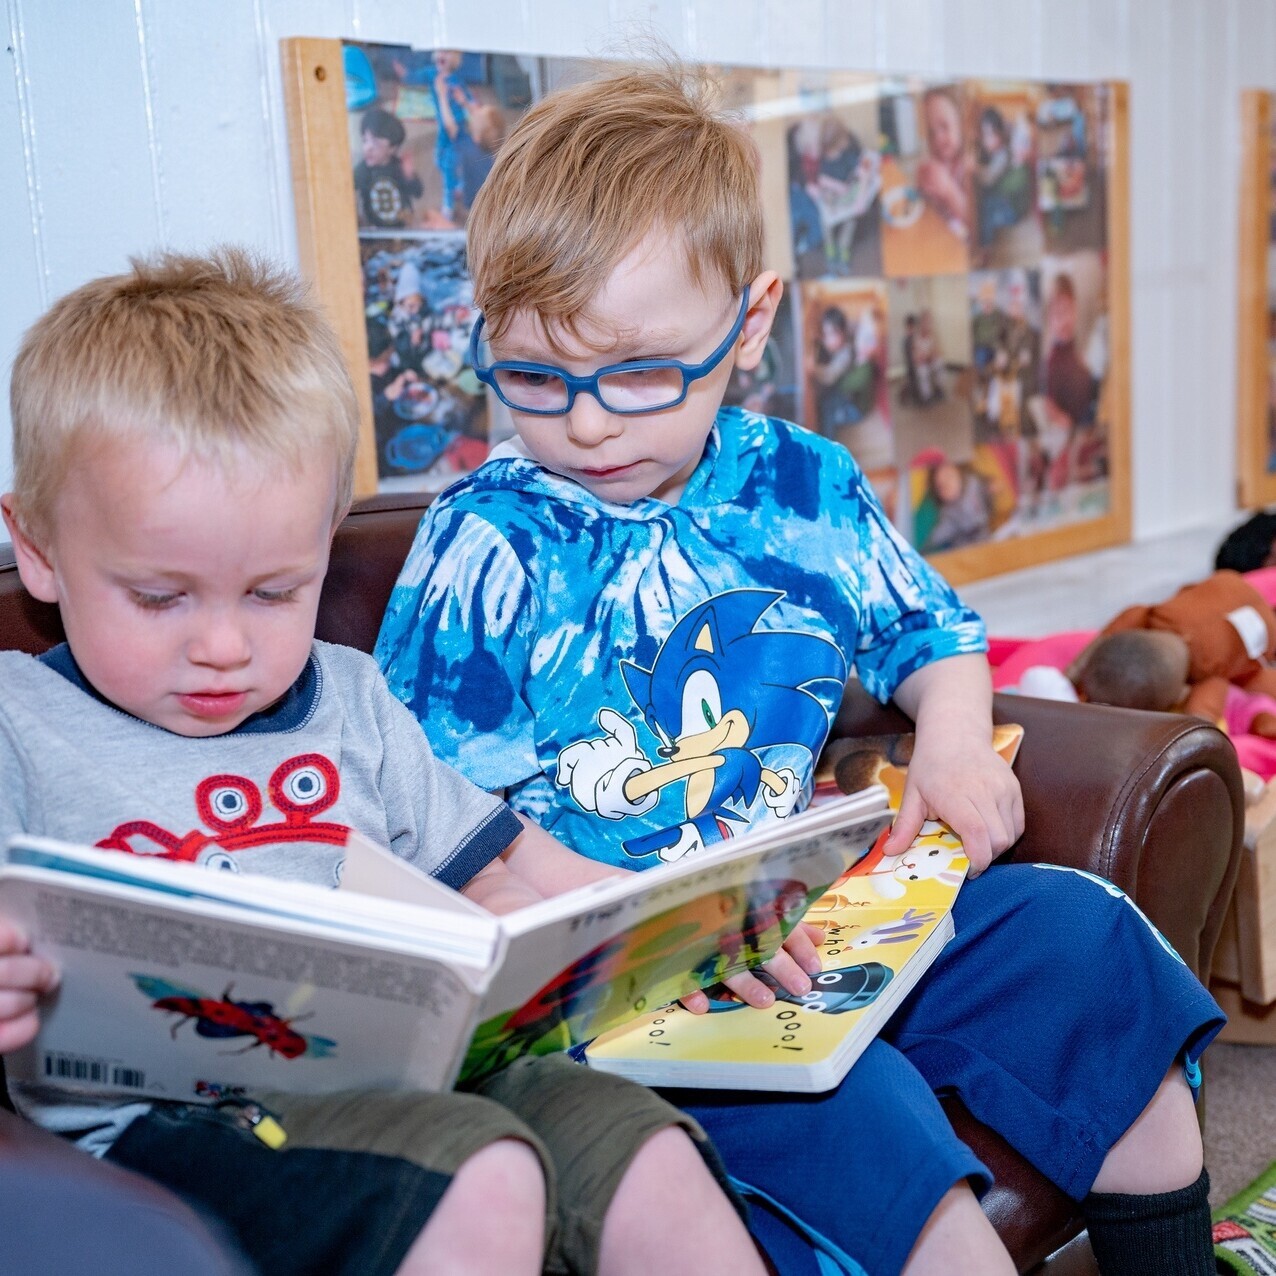 Young children reading books on a small couch